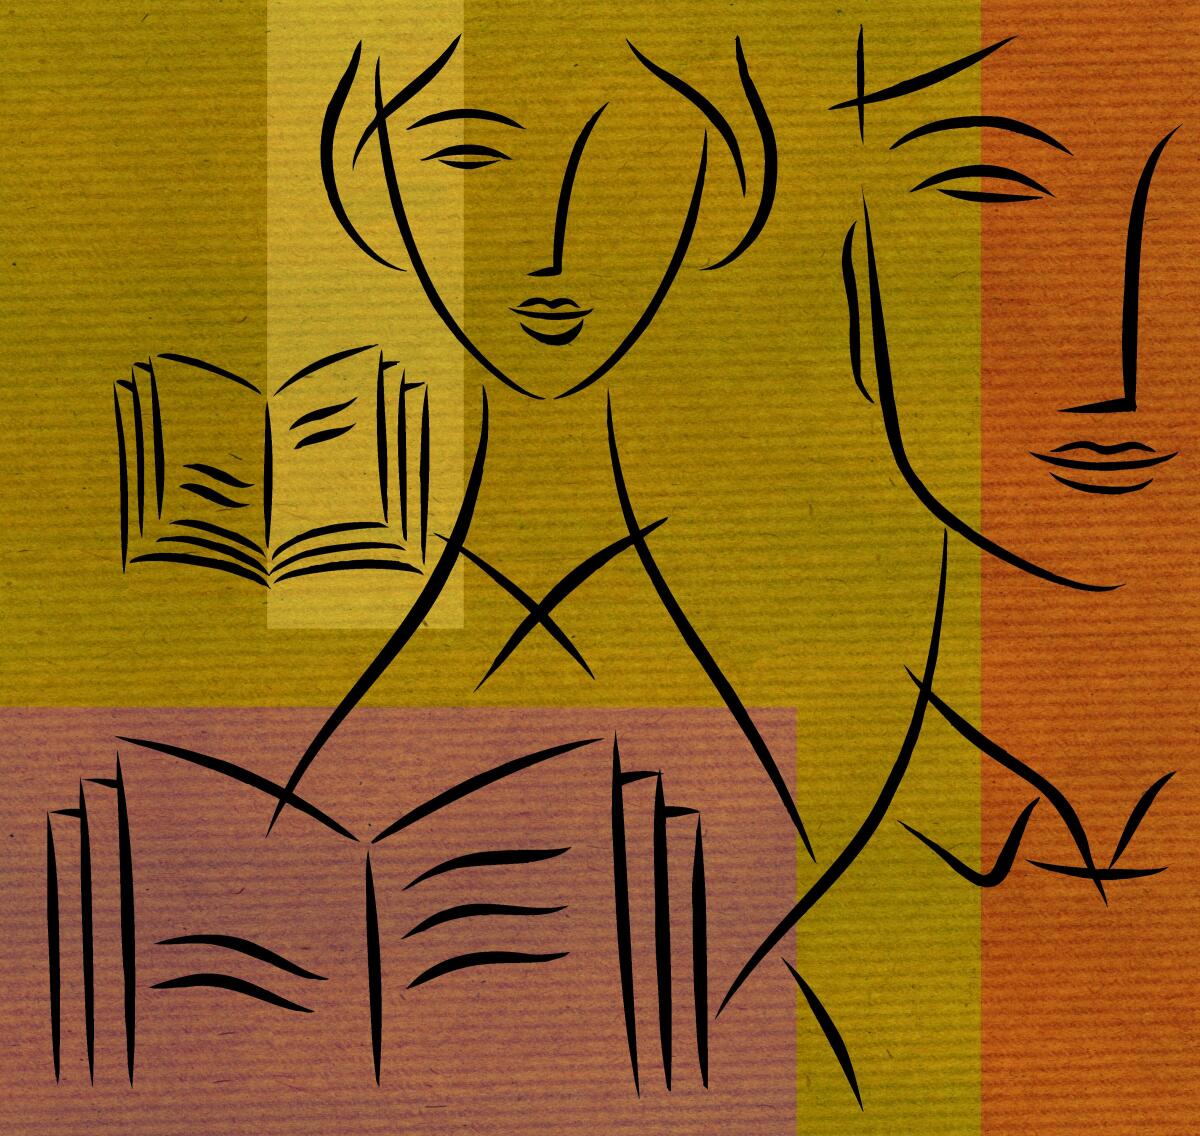 People and books drawn in black on a yellow and orange background